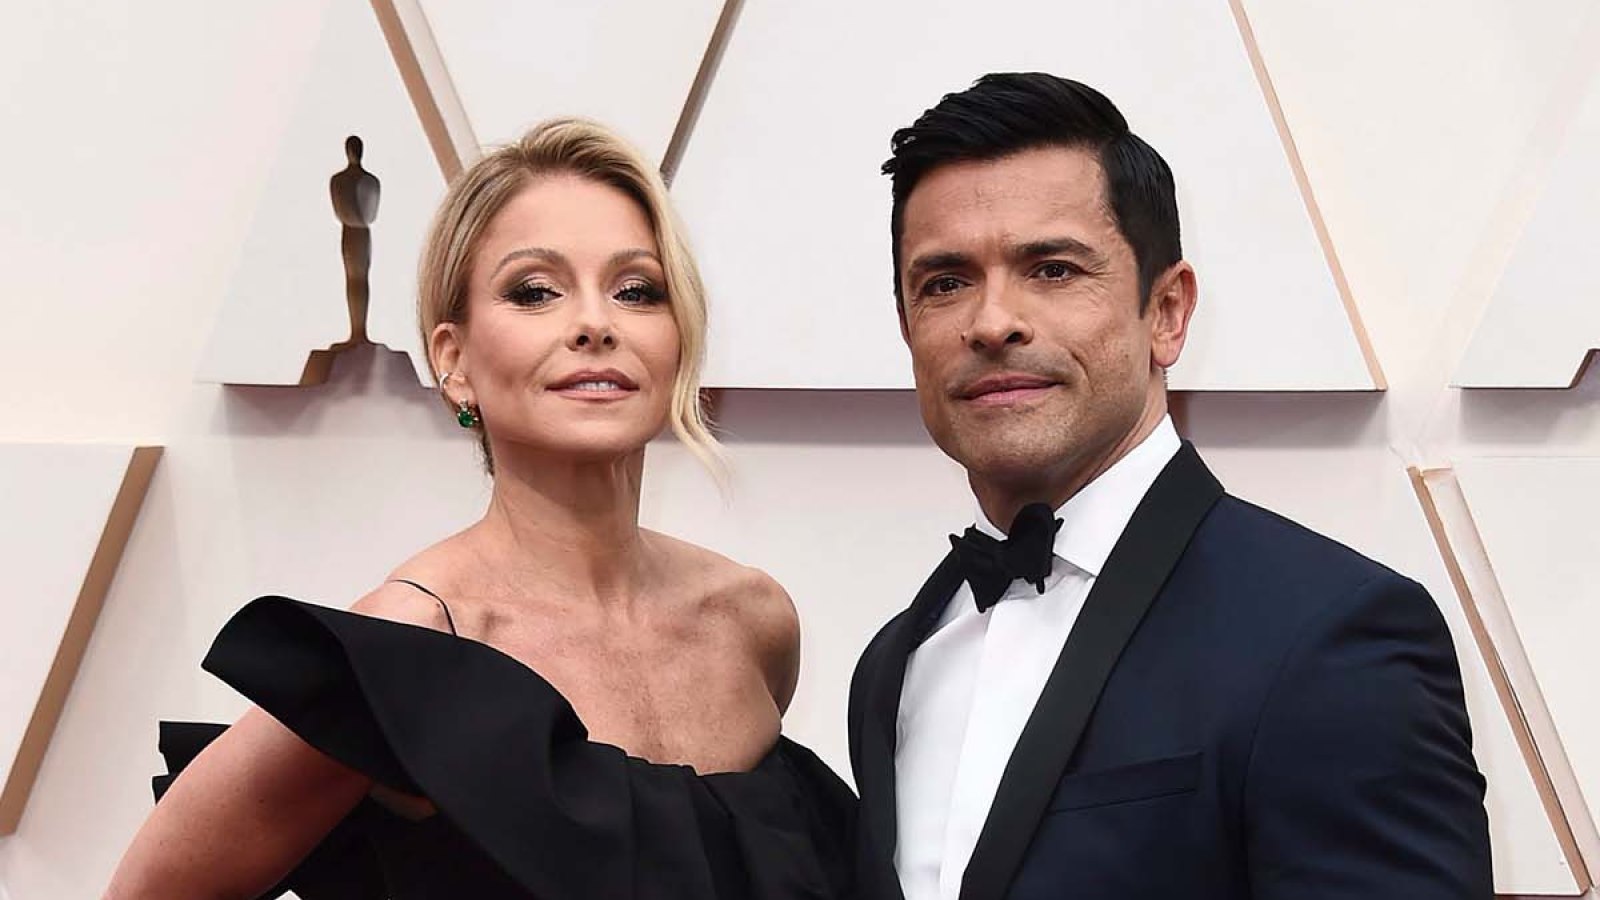 'What Could Go Wrong?' Kelly Ripa and Mark Consuelos Talk Cohosting 'Live'